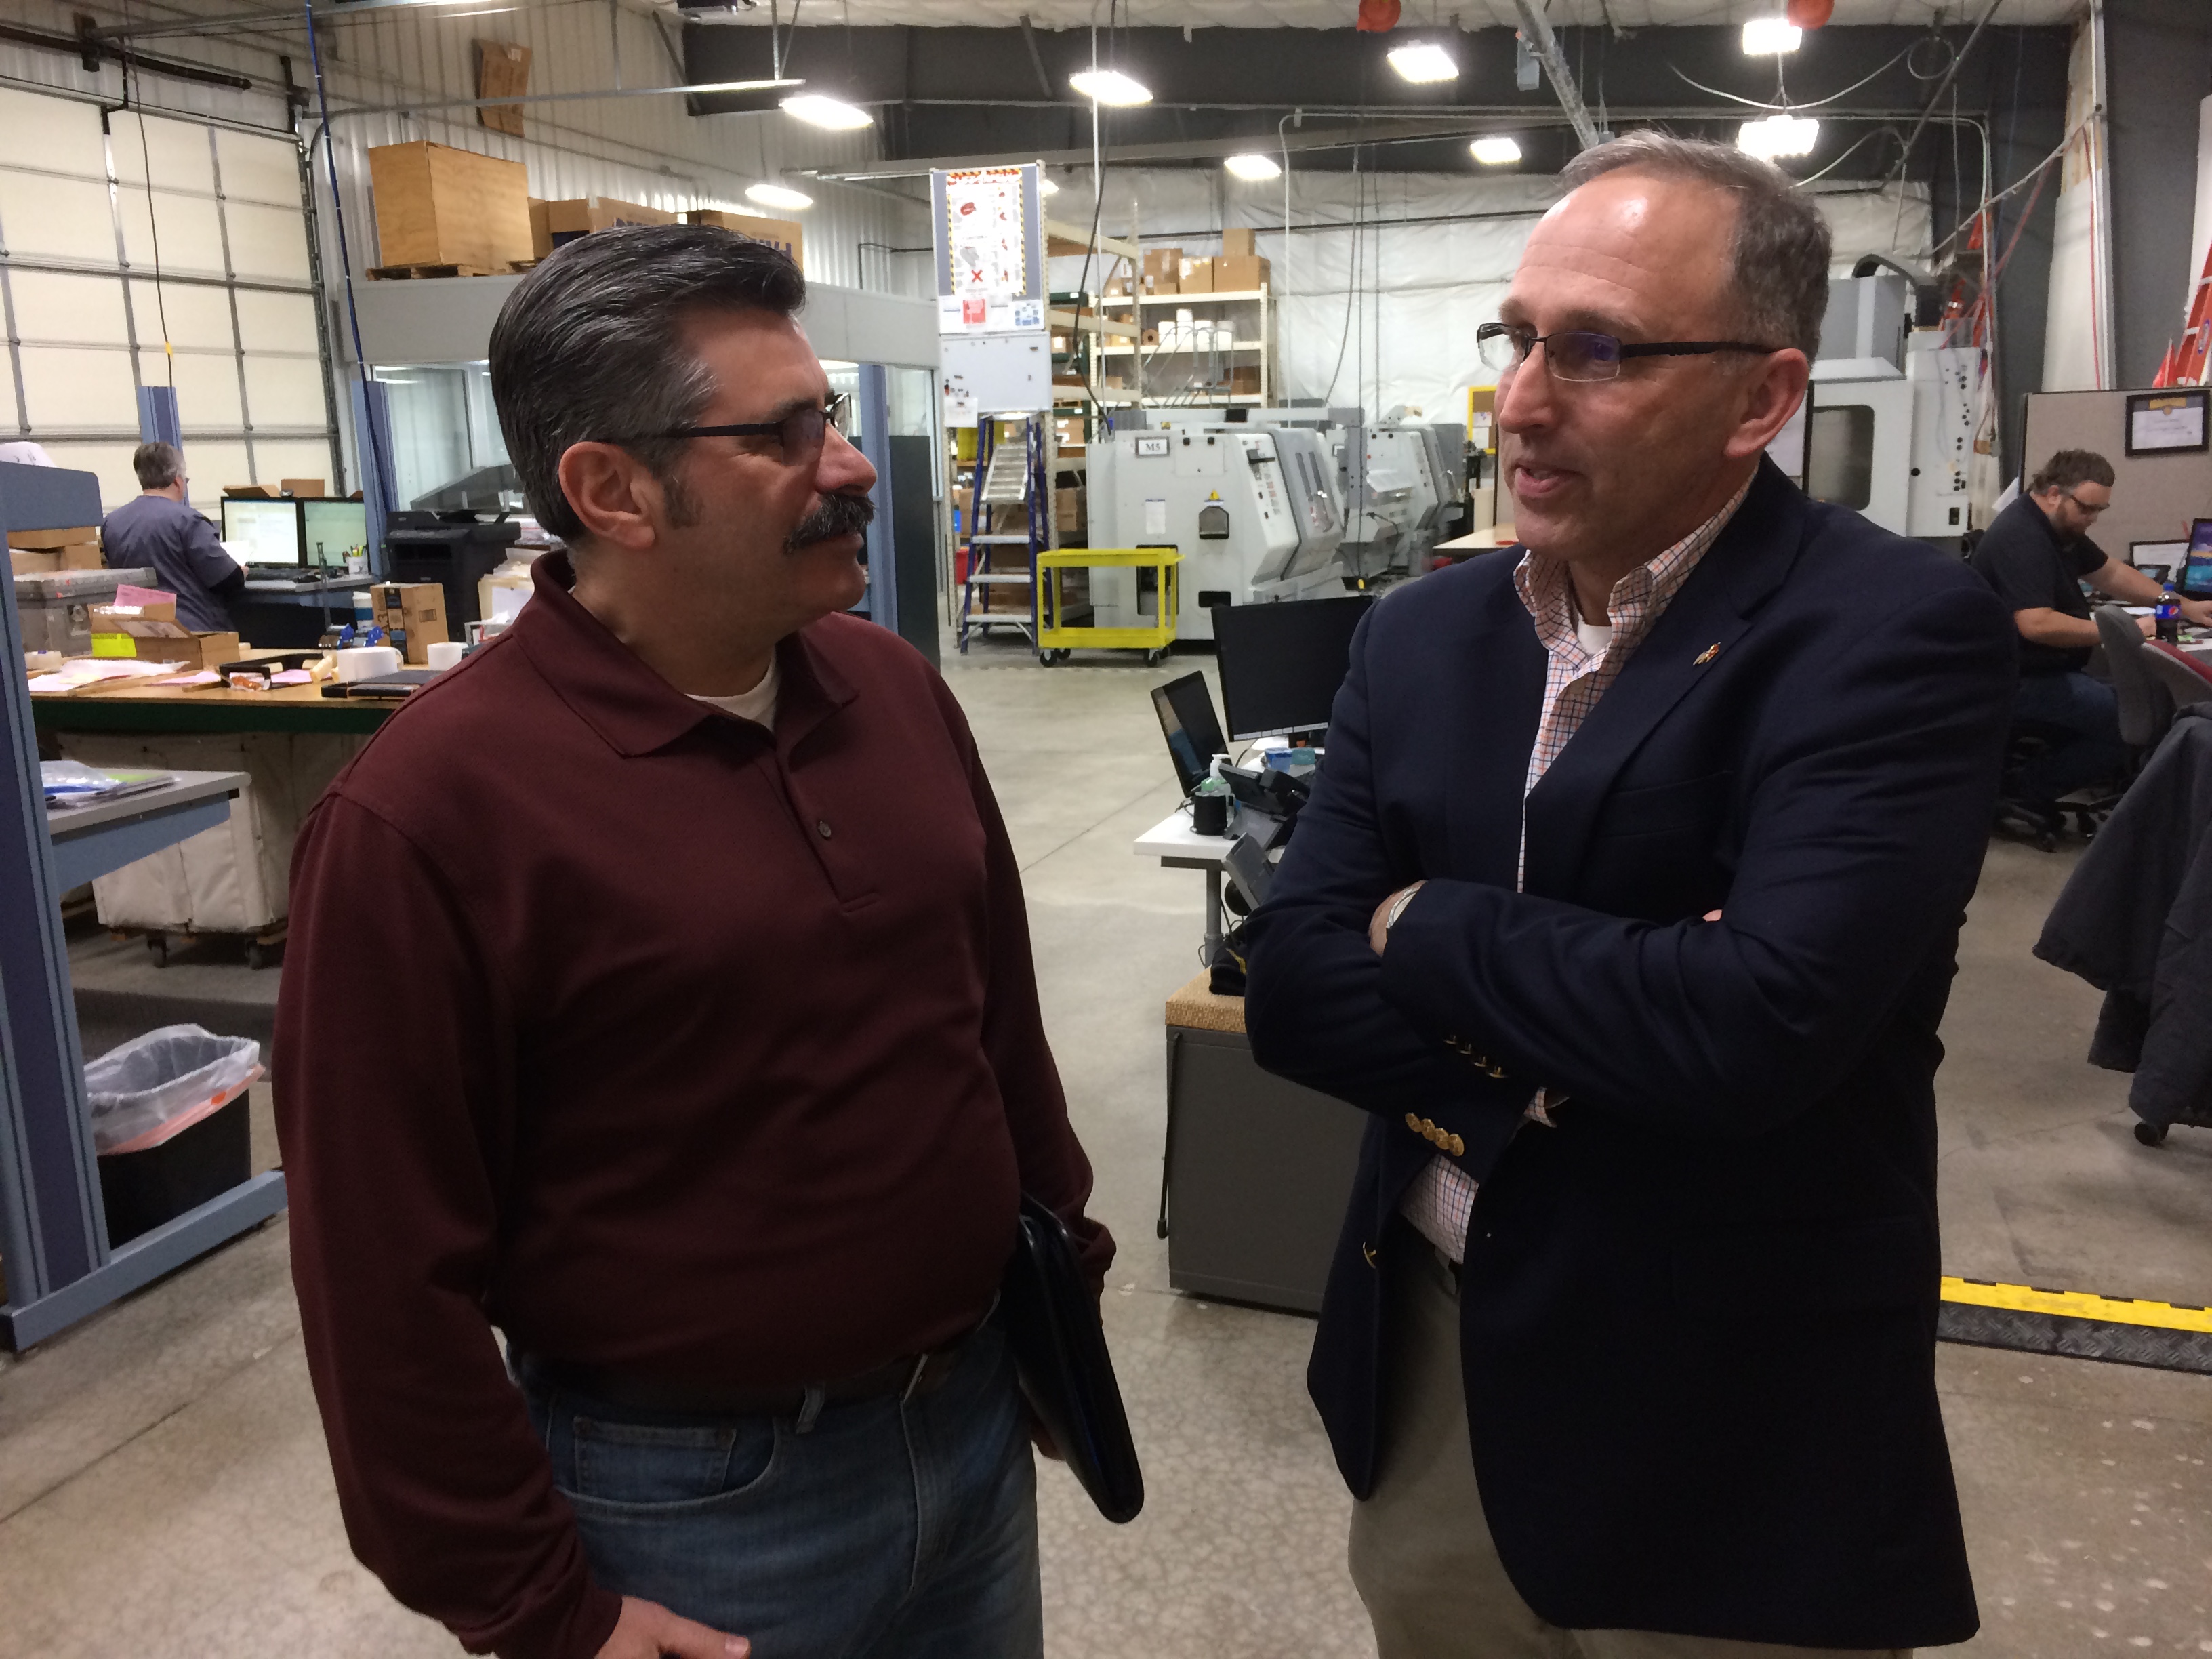 Two men standing in manufacturing area having a conversation